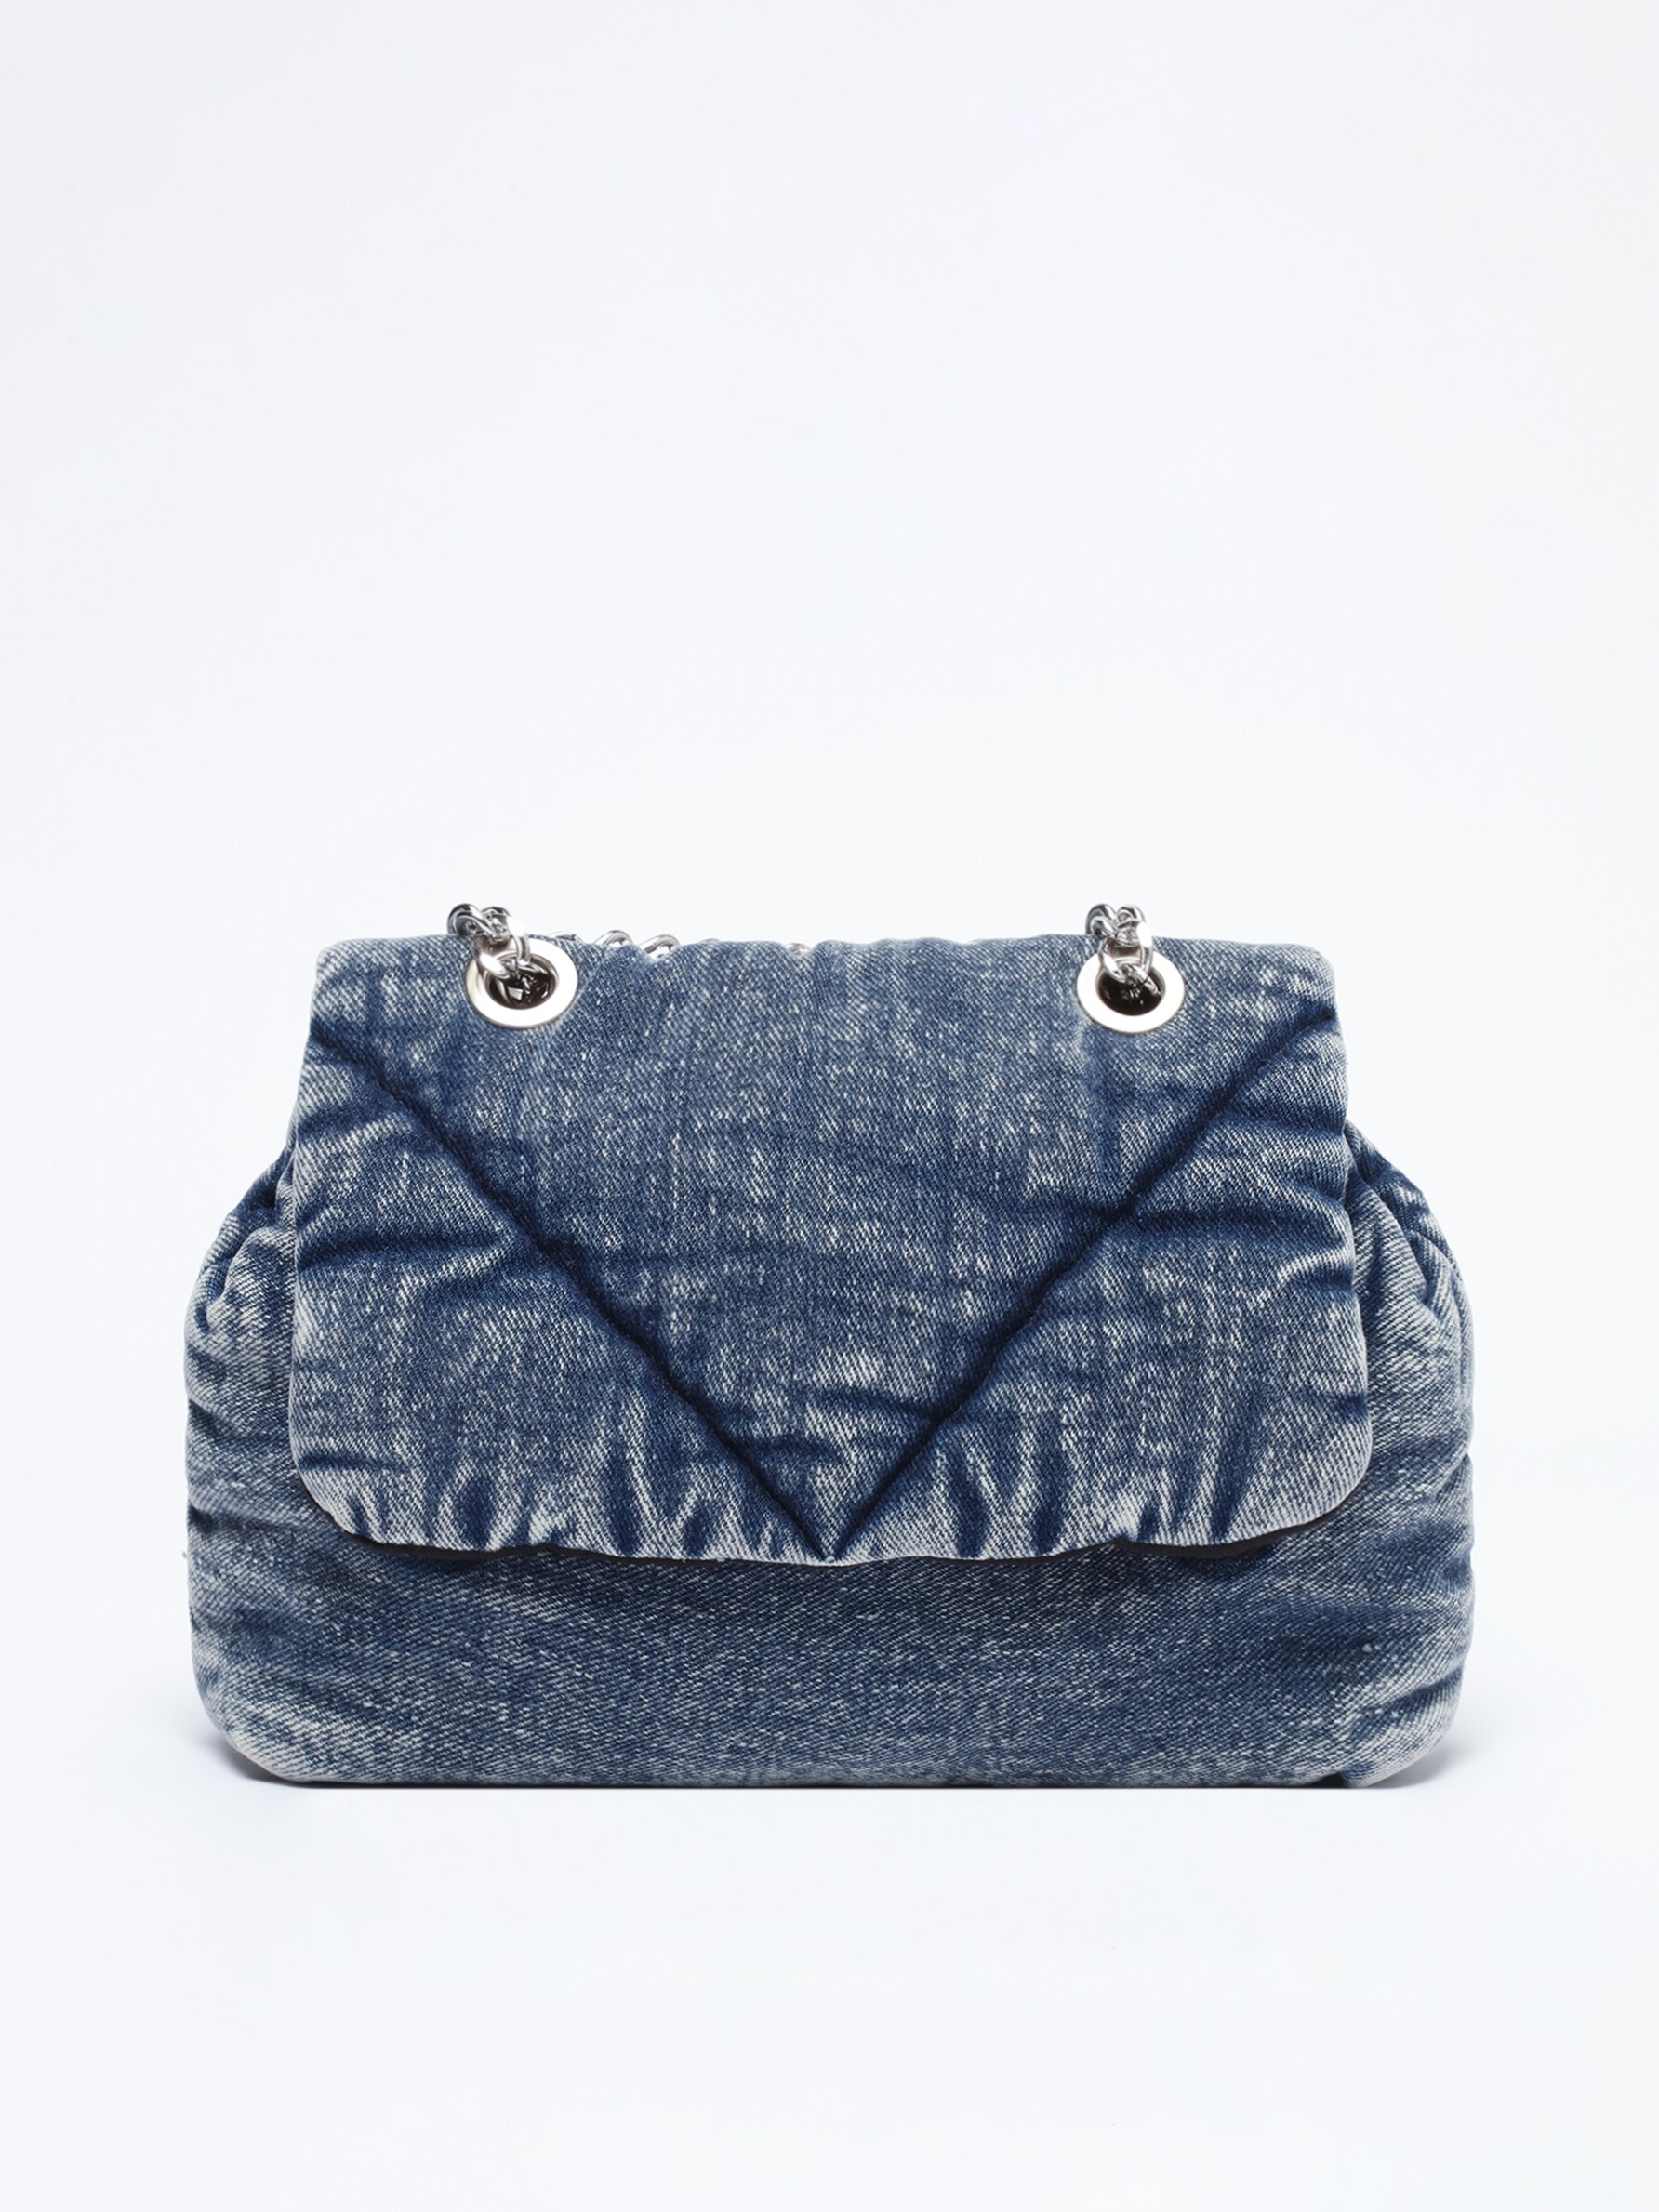 Make a Jean Purse from an Old Pair of Jeans Pants - Simple Practical  Beautiful